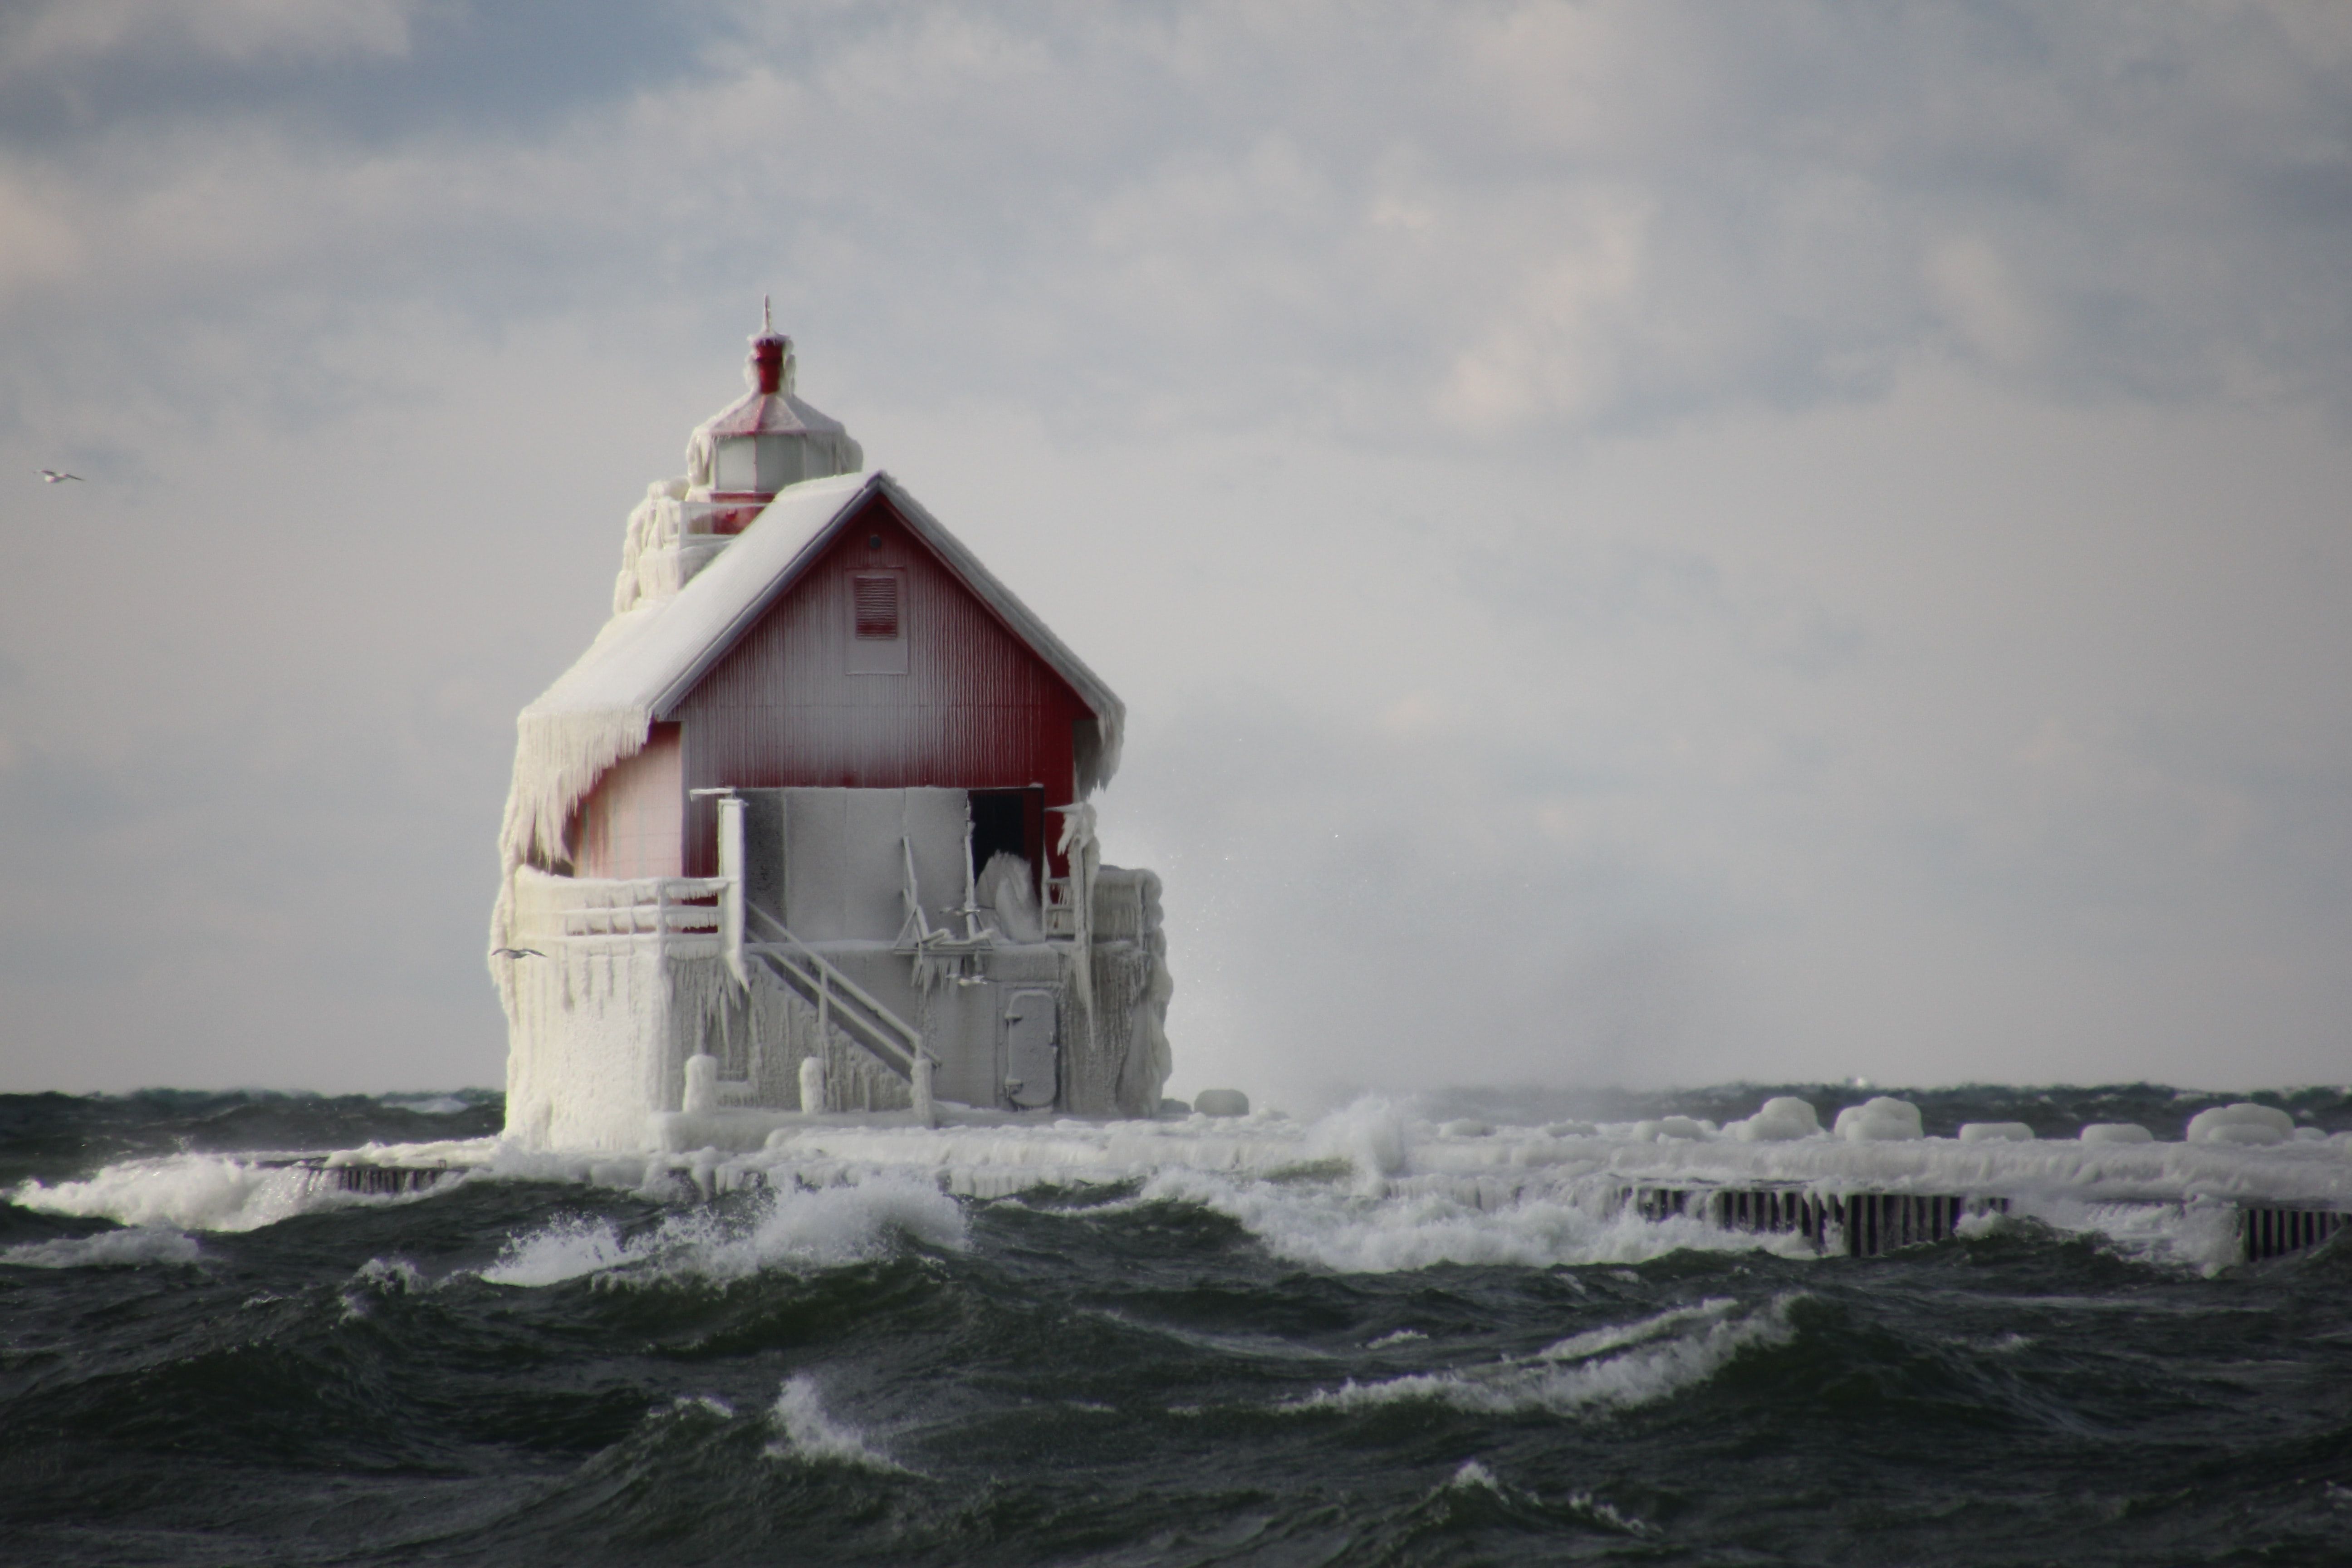 Lighthouse 4K wallpaper for your desktop or mobile screen free and easy to download